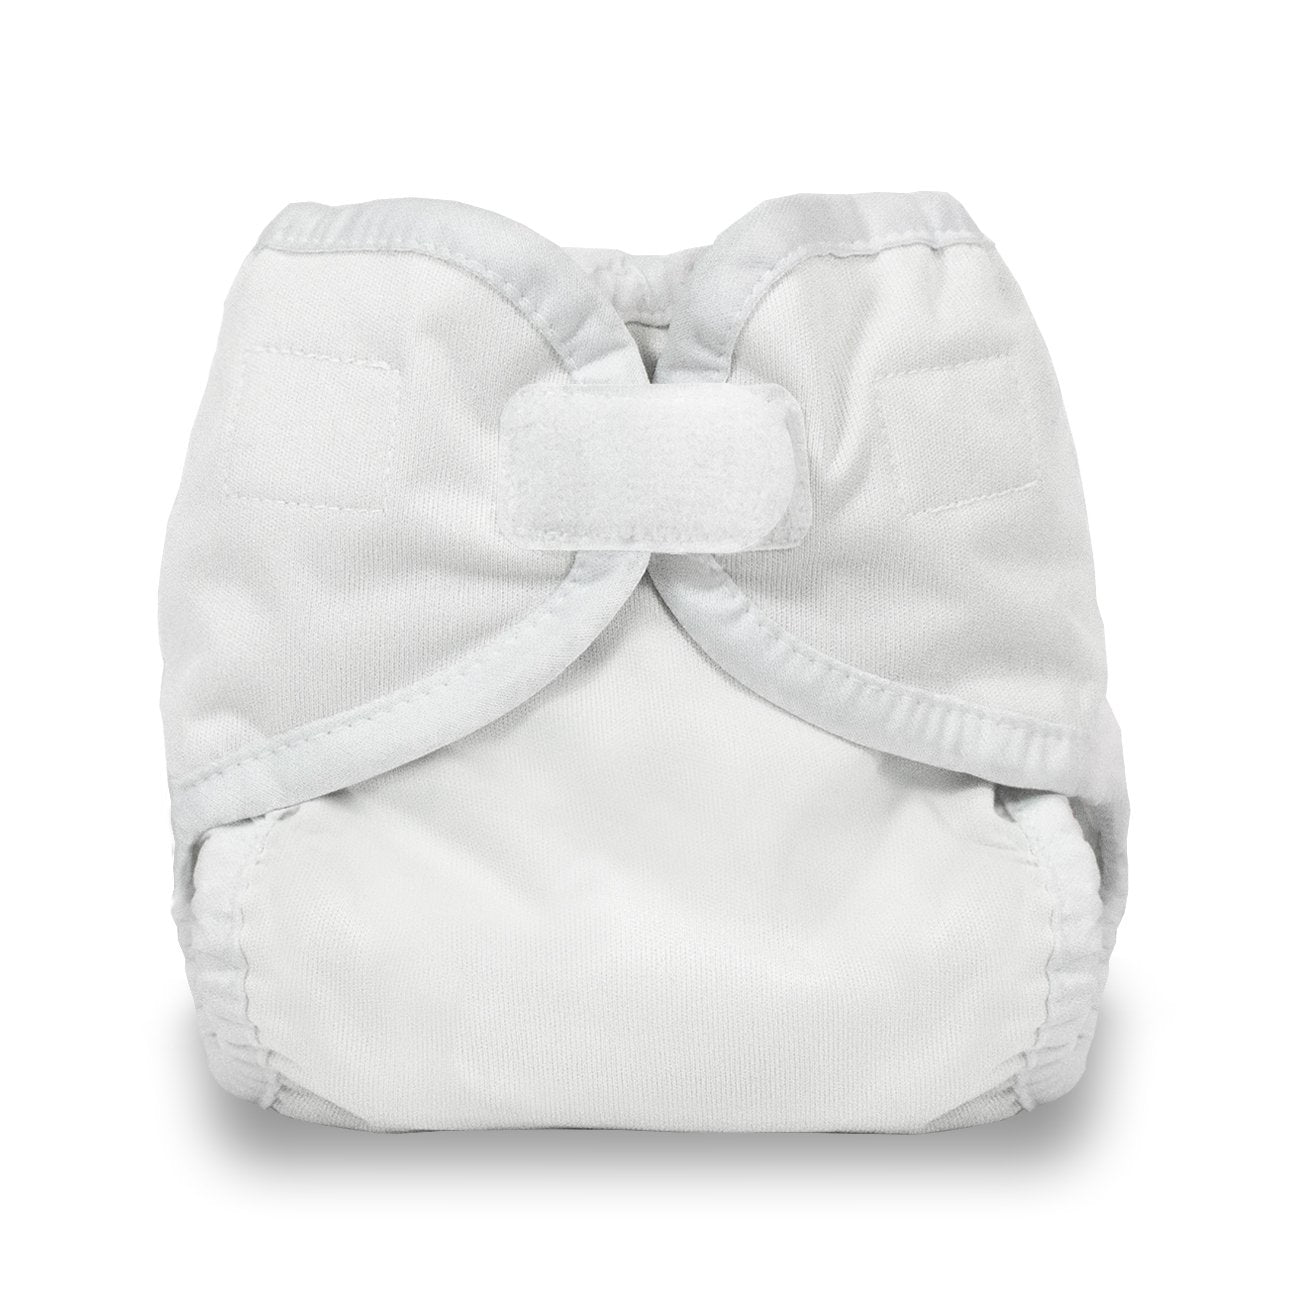 Image of Thirsties Diaper Cover Hook & Loop White X-Small